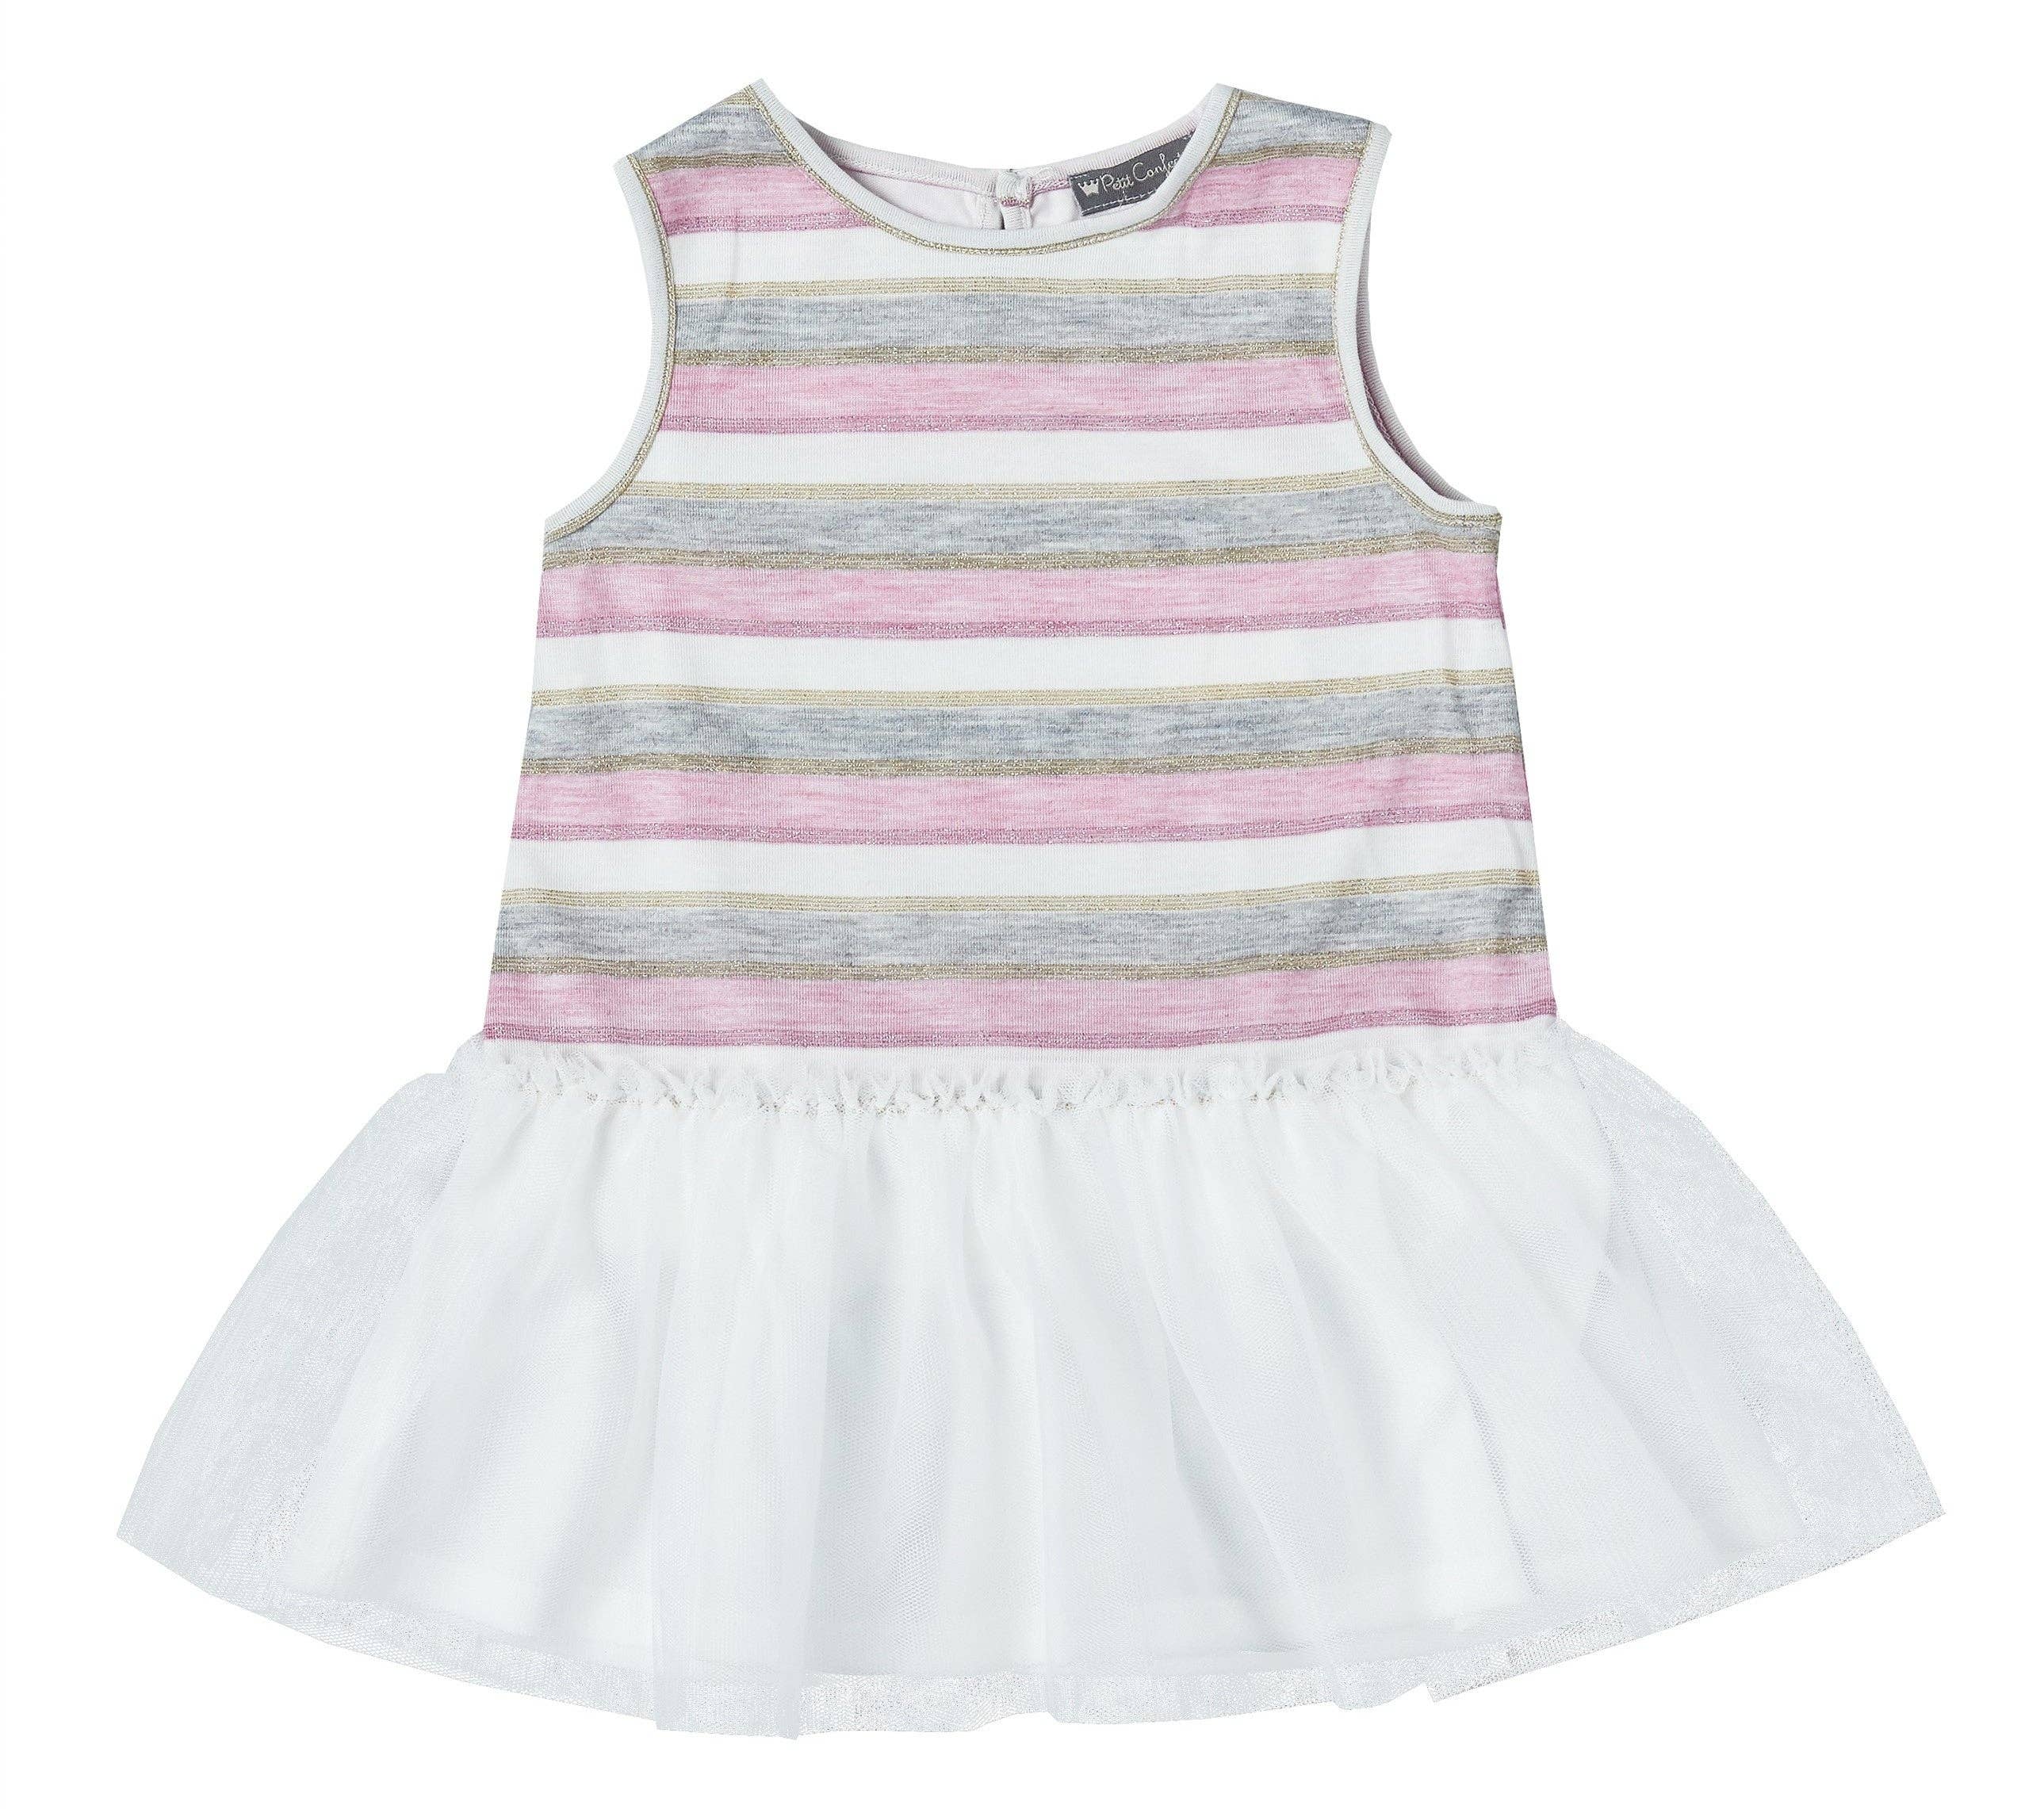 Knit Striped Tulle Dress - CapuletKids